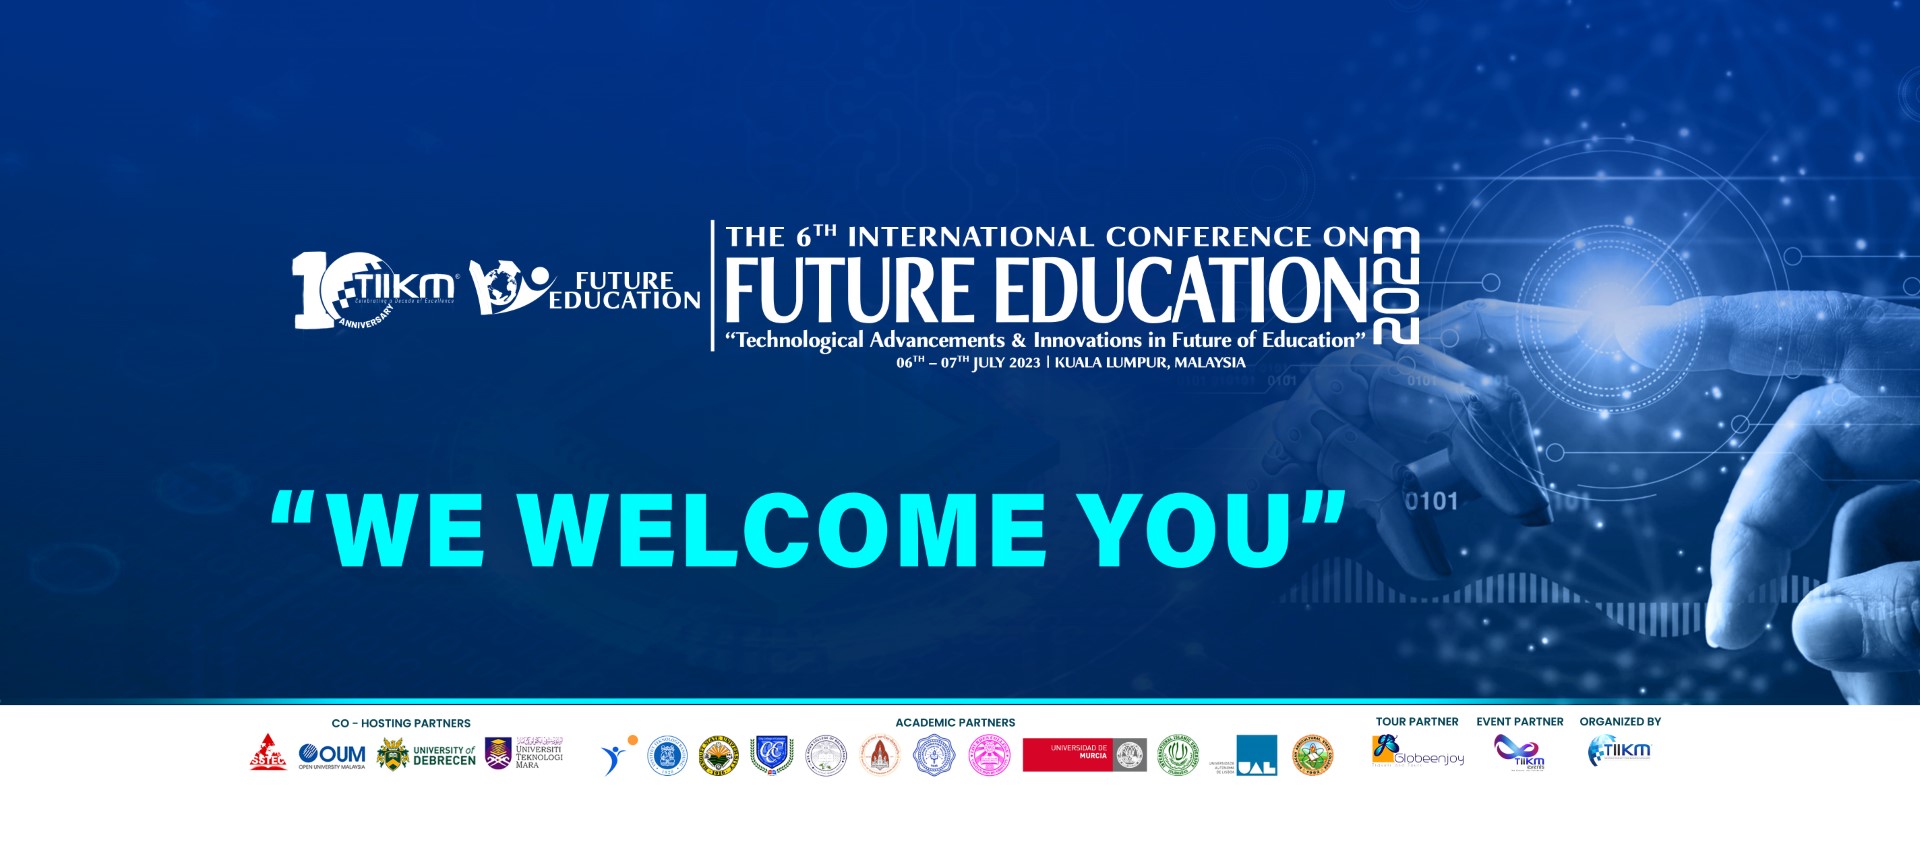 FOE 2023 Facebook Cover The 7th International Conference on Future of